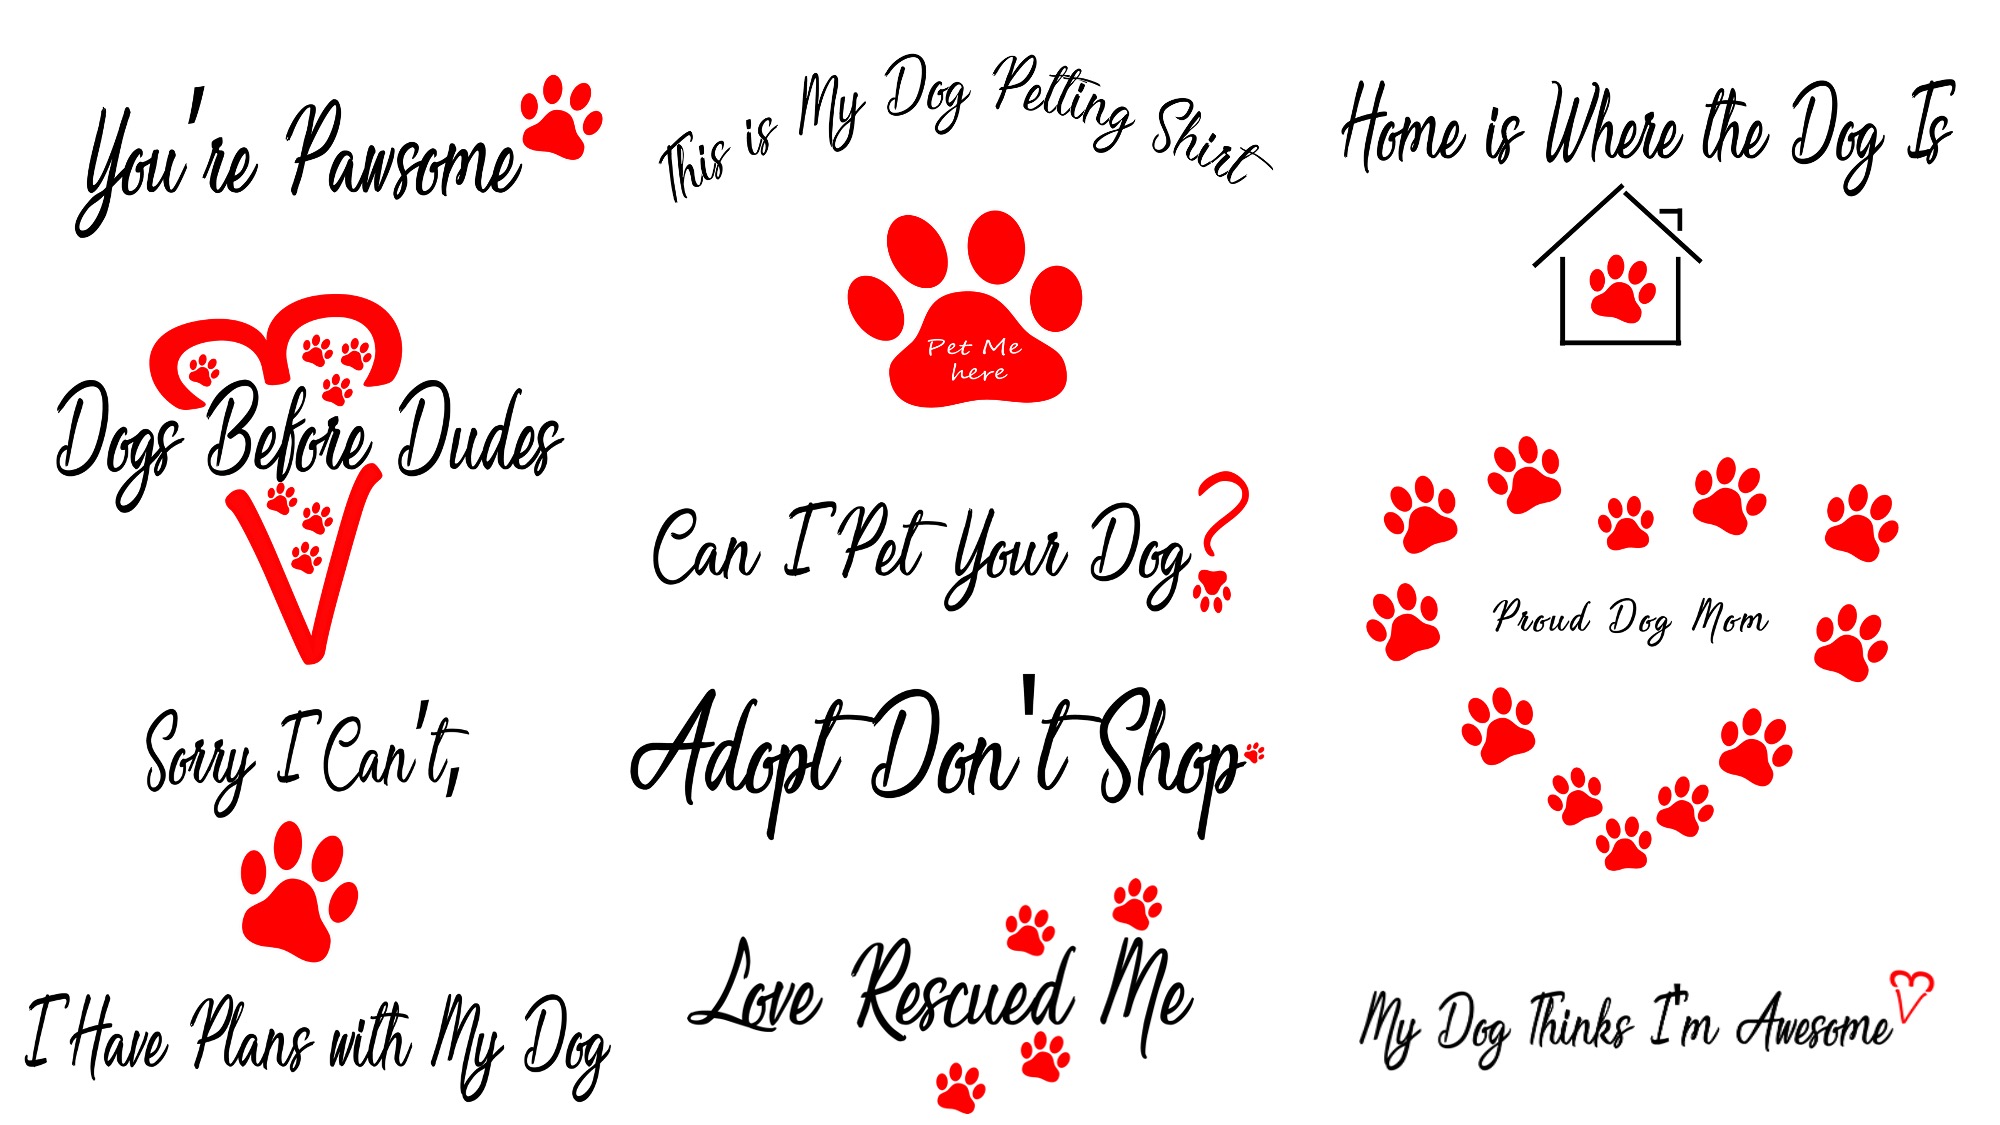 10 Dog Product Templates with Commercial Use Rights